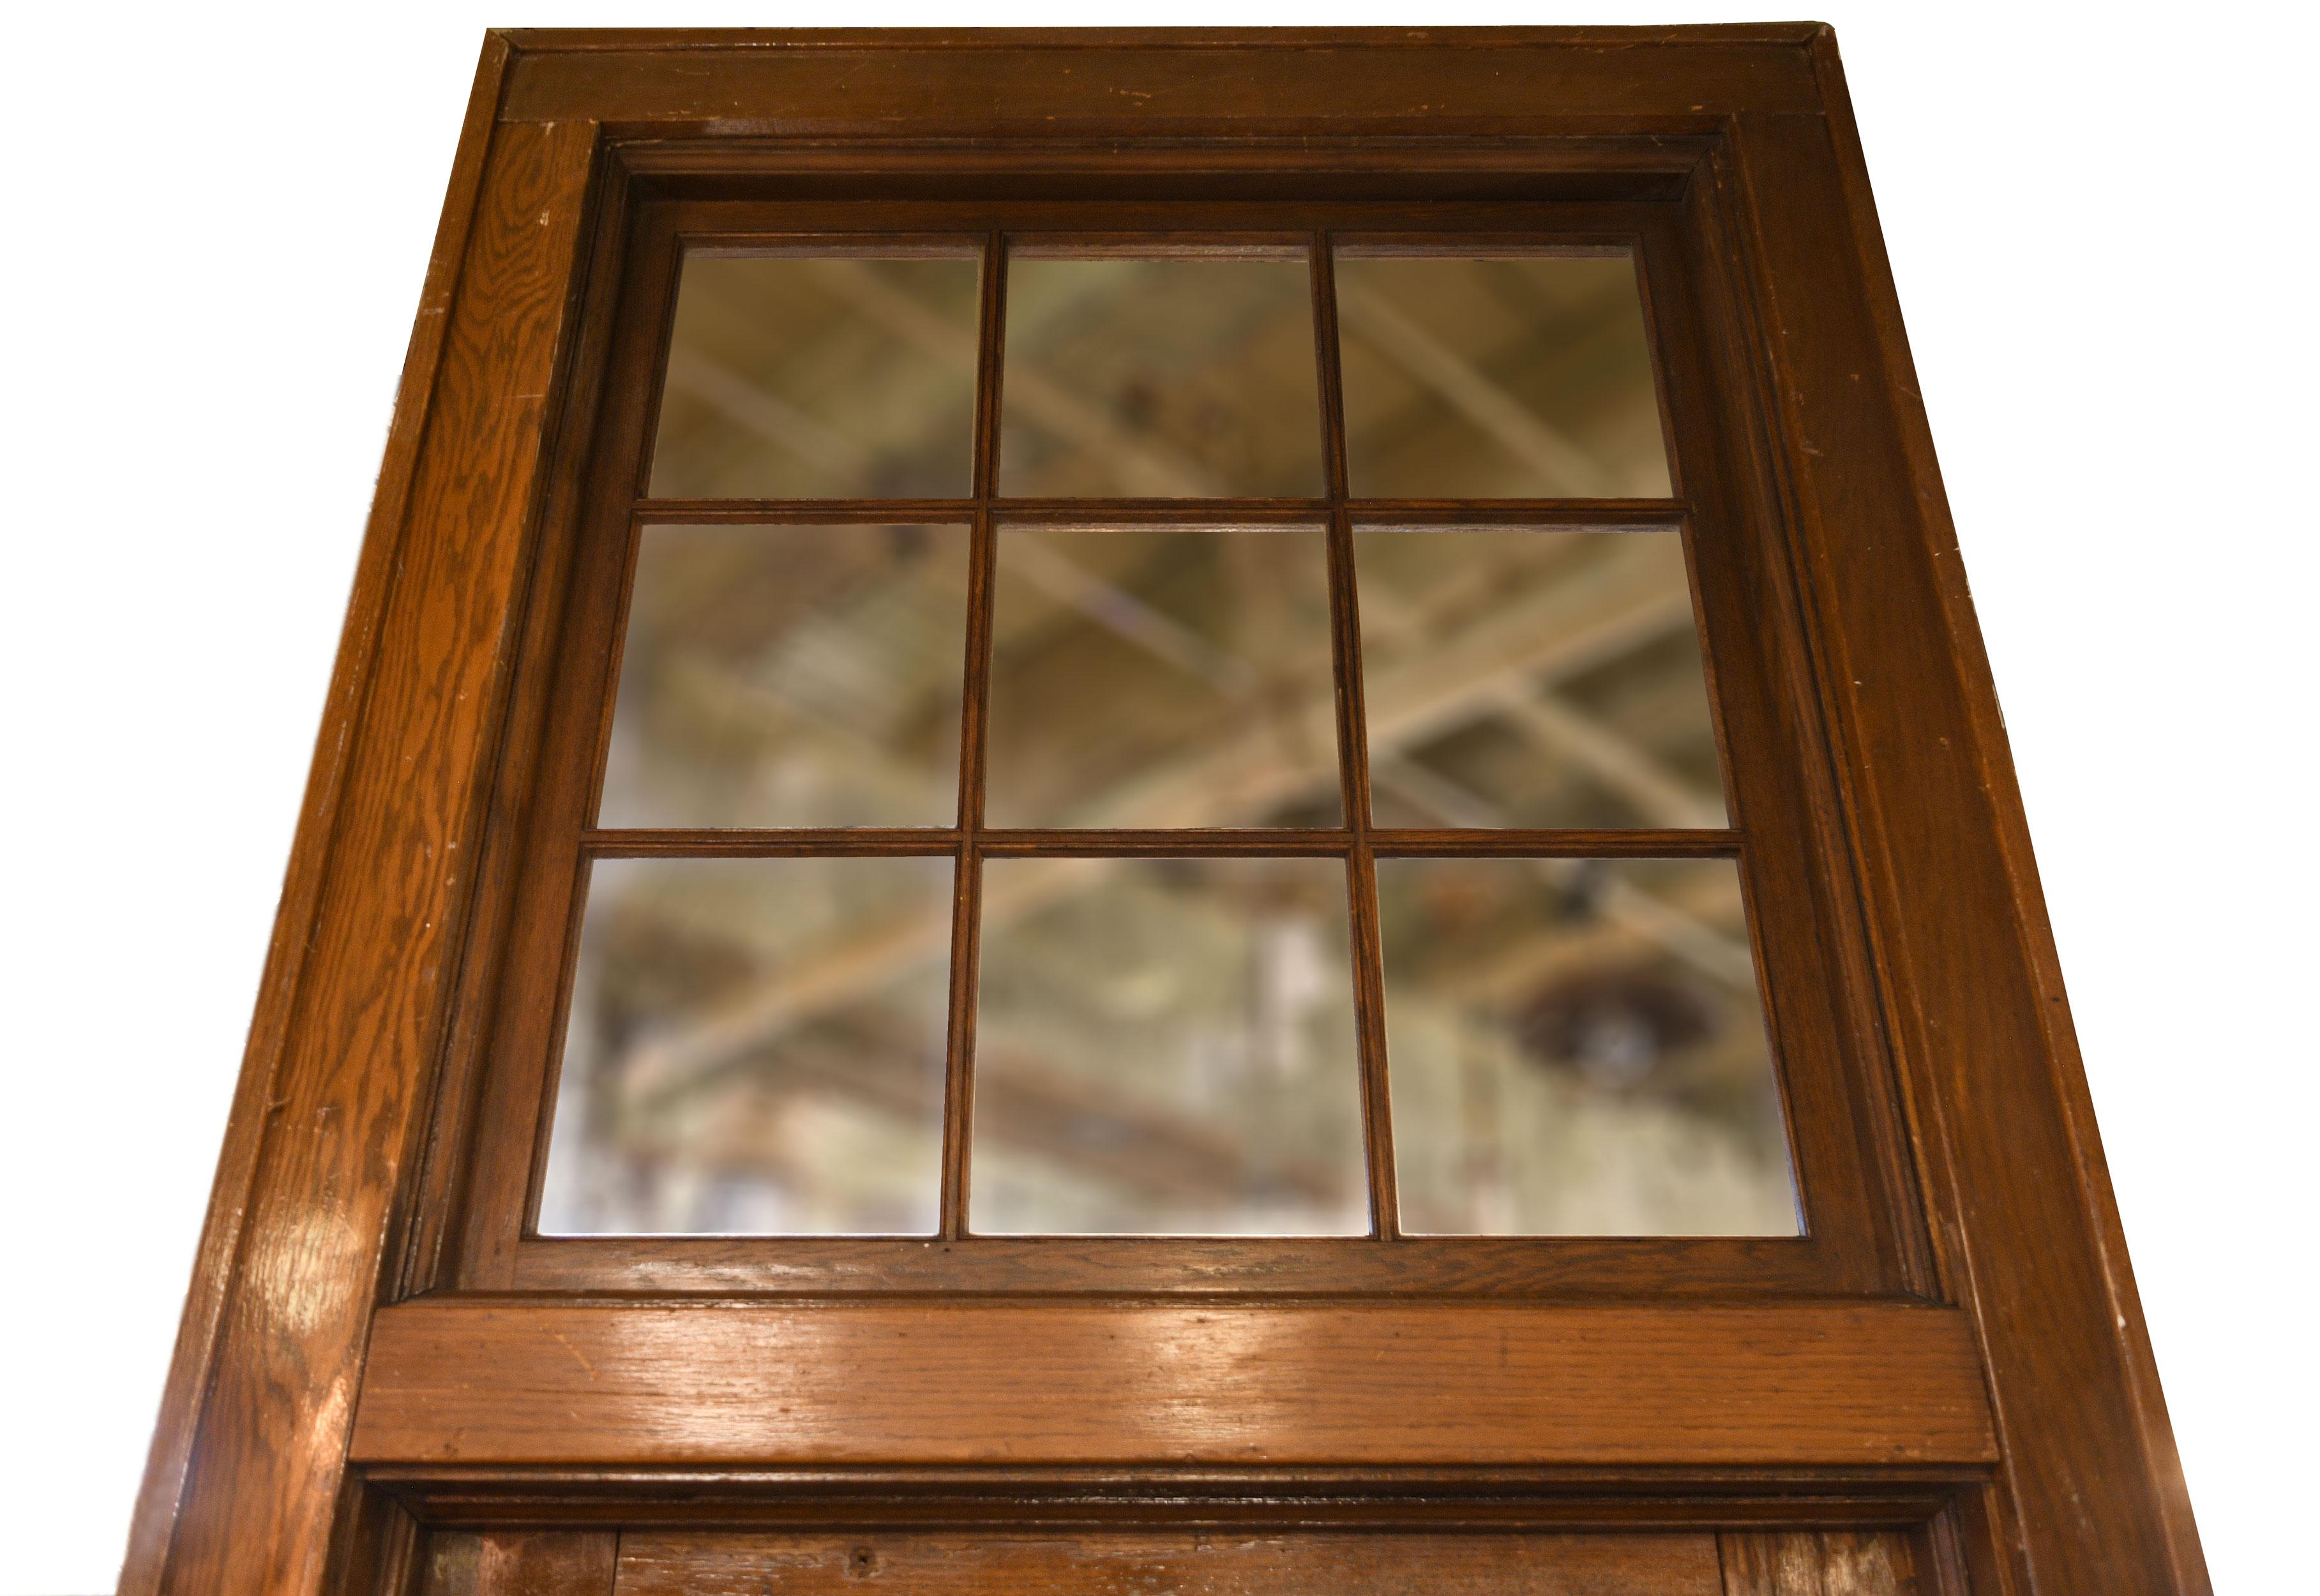 This beautiful oak schoolhouse door is not your average door! This piece towers over the average person standing at 10 feet tall! Included with the door is a frame that features a transom separating the actual door from the nine panel window sitting